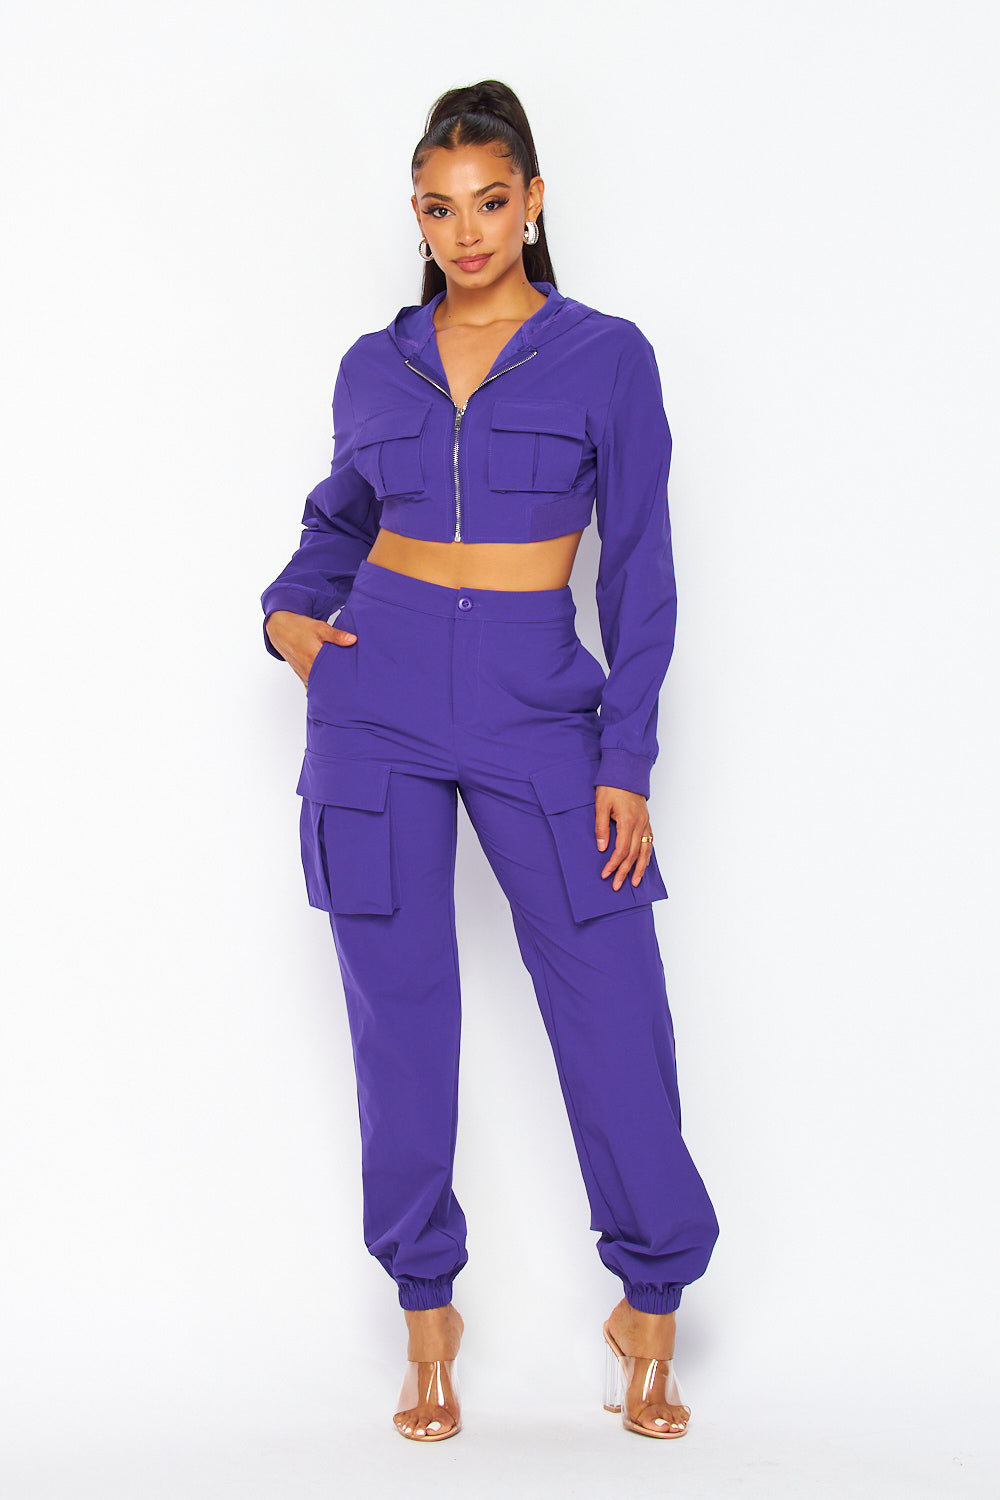 She's Spicy Nylon Hooded Top And Jogger Pant Set